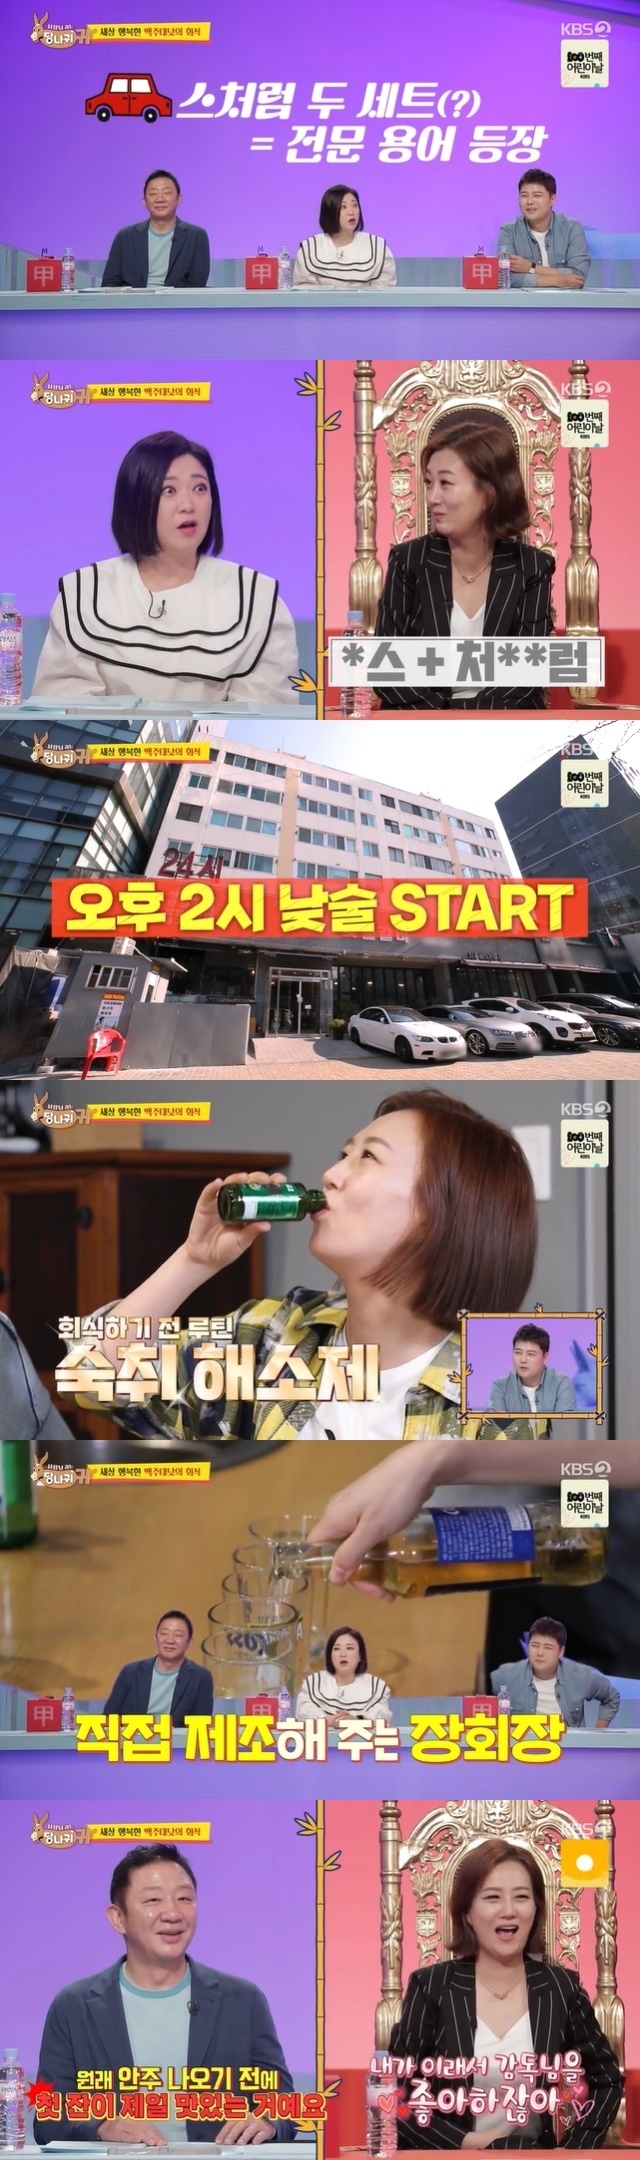 Jang Yun-jeong showed a love-sweet face.In the 154th KBS 2TV entertainment Boss in the Mirror (hereinafter referred to as The Ass) broadcast on May 1, Legend Trot singer Jang Yun-jeong joined as the new boss.Jang Yun-jeong, who is in the midst of preparing for his division and concert recently, summoned the division to the house on a day without work.I had a dinner on a day when I did not work on purpose to make it easier to distinguish between the ball and the company.Jun Hyon-moo asked, Is it Daytime Drinking? Kim Sook said, I will eat rice. Do you want to drink at 2 pm?However, Jang Yun-jeong in VCR naturally gave two sets like Xs and it was a jar of shochu and two bottles of beer.Jang Yun-jeong prepared Daytime Drinking by eating the Big Hangover reliever as much as possible.Jang Yun-jeongs junior laughed while drinking wheat, saying, I did not even come out, but I eat alcohol.Jun Hyon-moo also said, I put it in a snack. I was worried about drinking alcohol in an empty stomach, but Huh Jae-man said, The first cup is the most delicious before coming out.I was almost as good as VCR, but when I see it, my eyes open. 